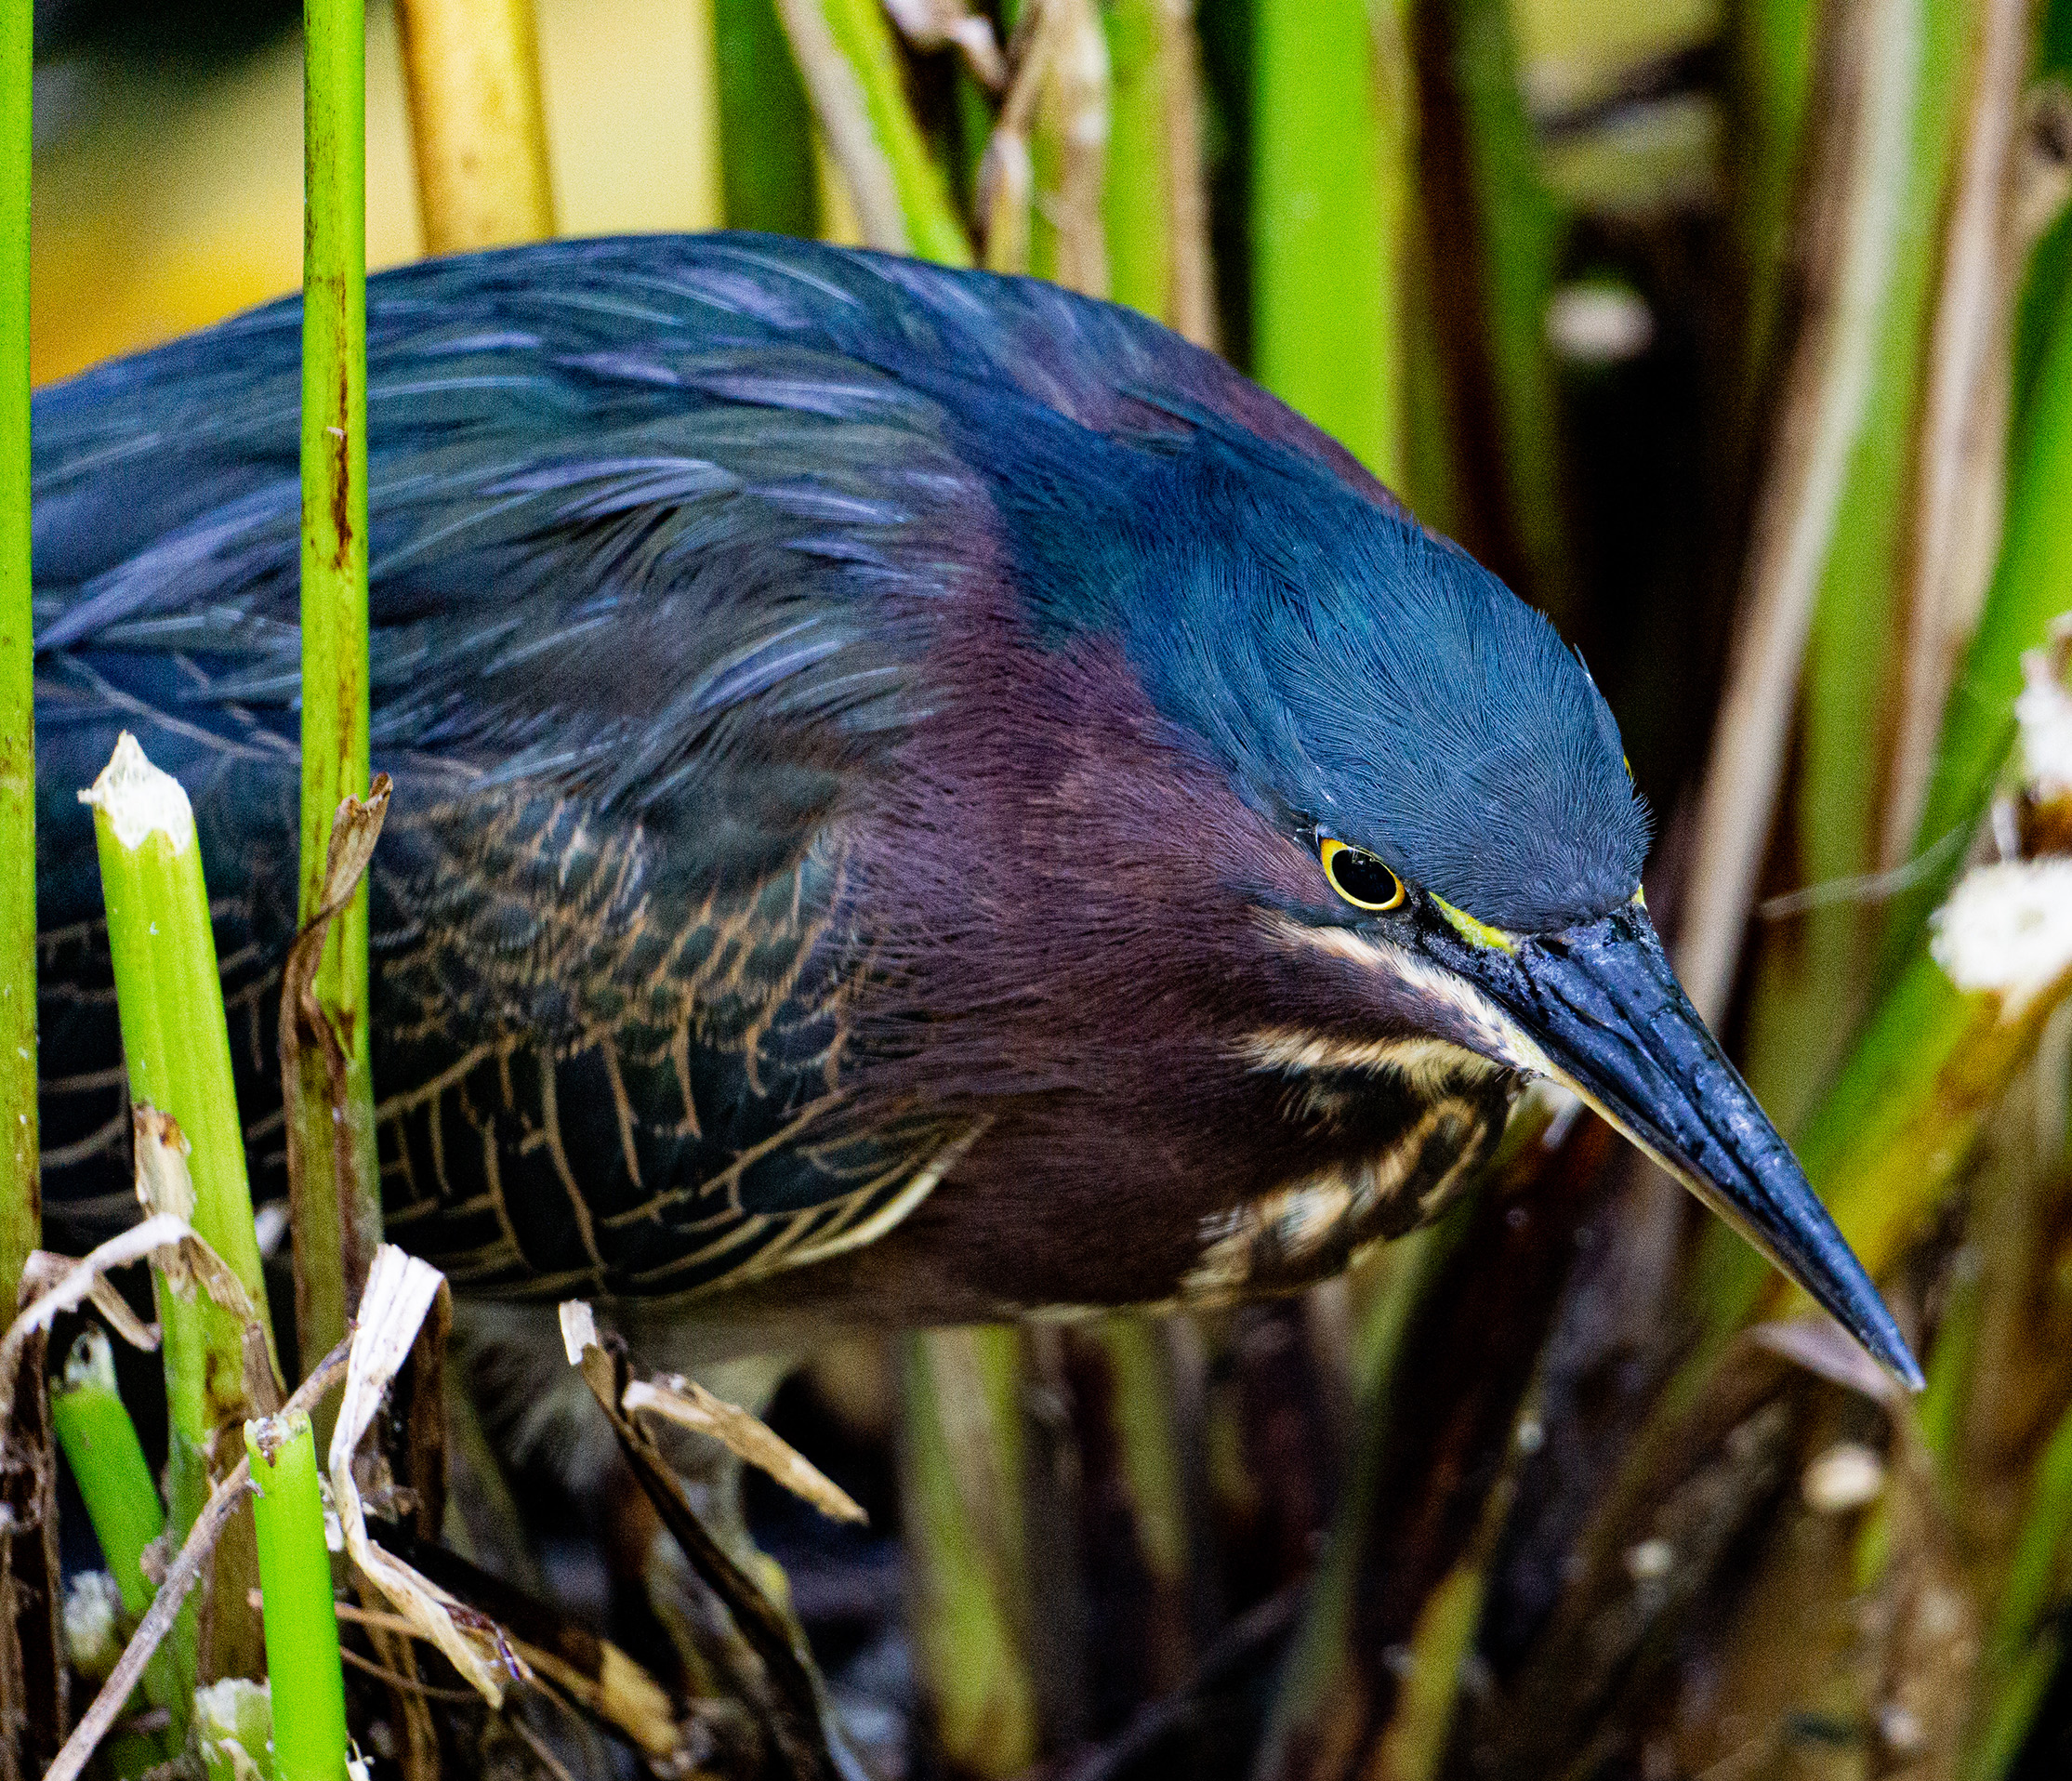 Green Heron intently hunting in a koi pond at Sunken Gardens in St. Petersburg, Florida